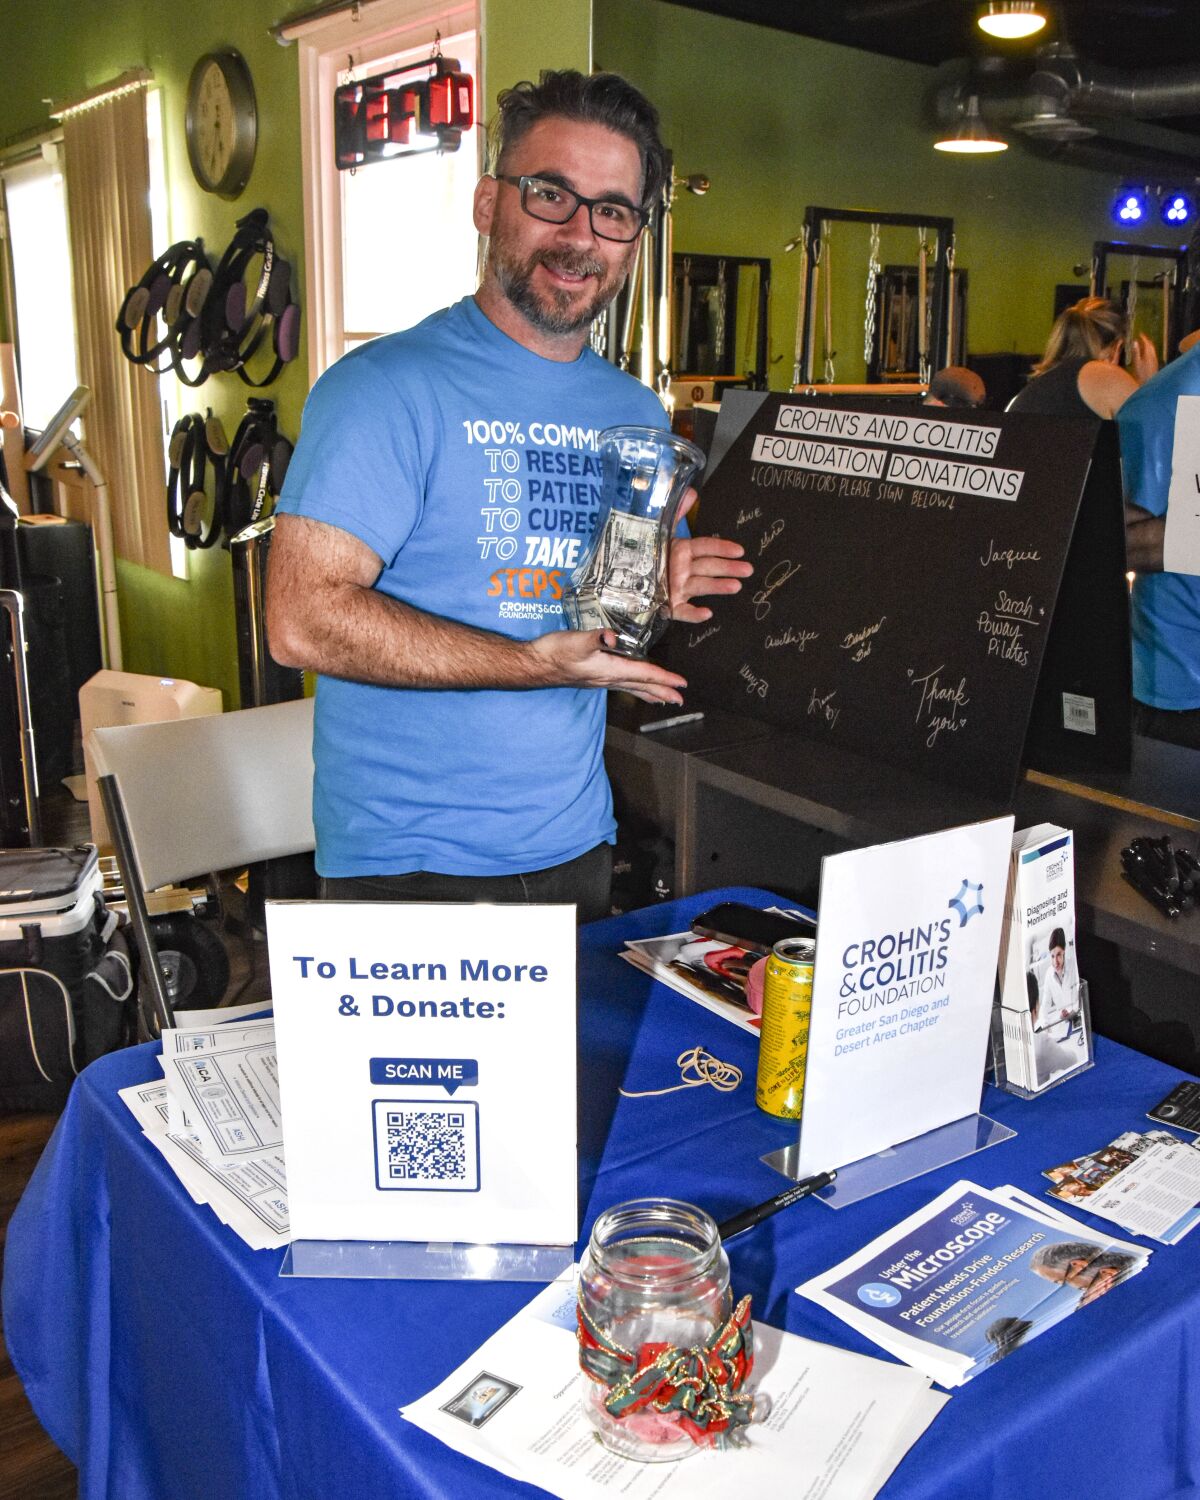 Anthony Silva represented the San Diego Crohn’s and Colitis Foundation at the reunion concert.